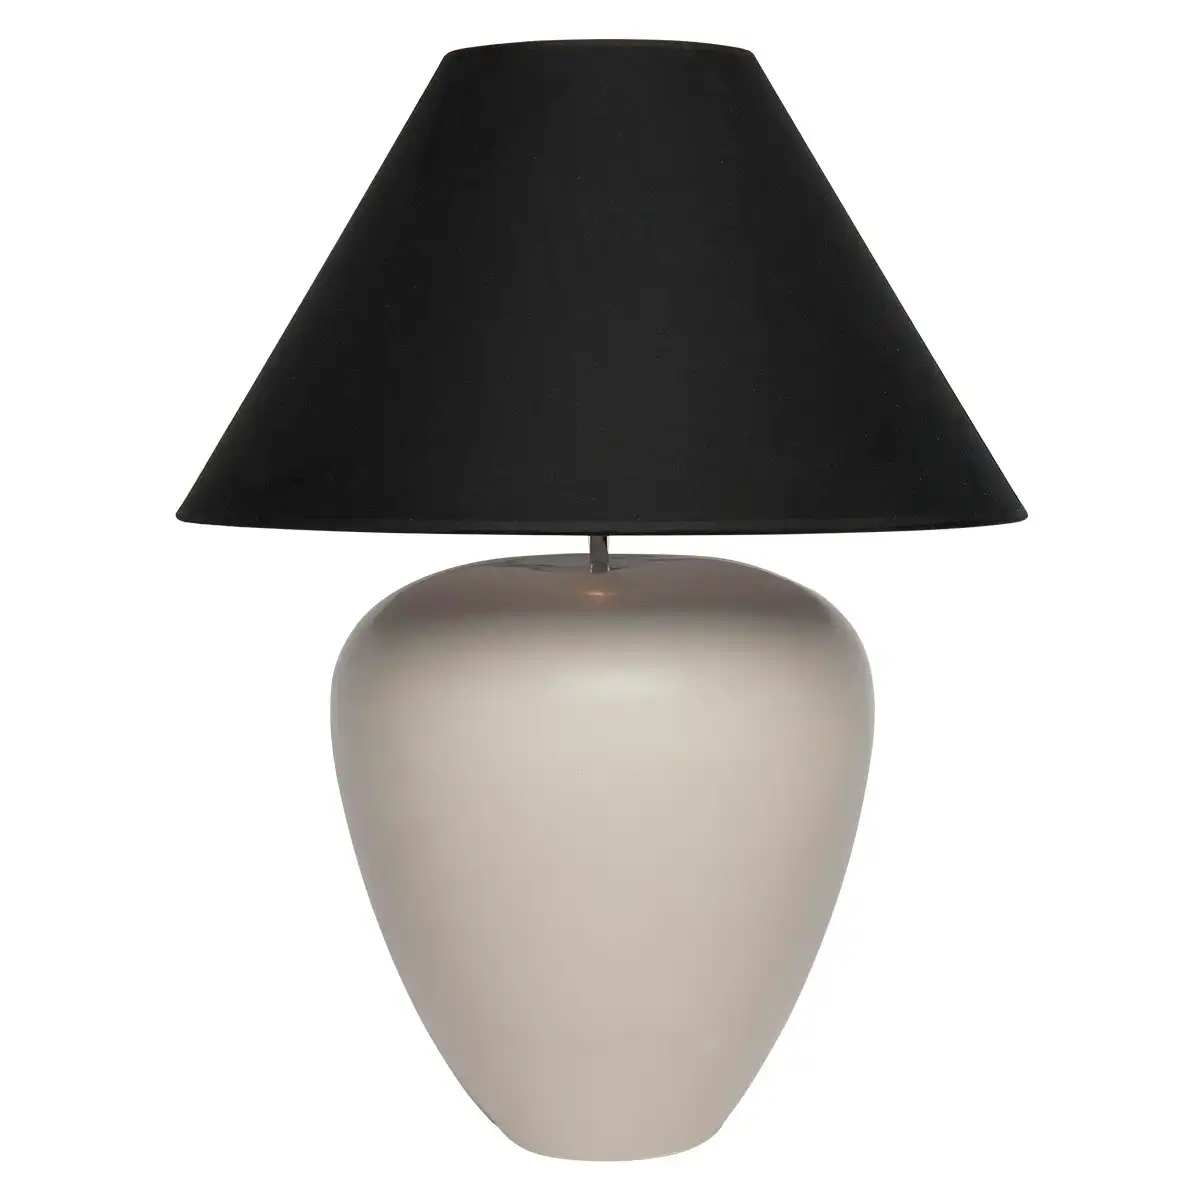 Cafe Lighting Picasso Table Lamp - Natural with Black Shade